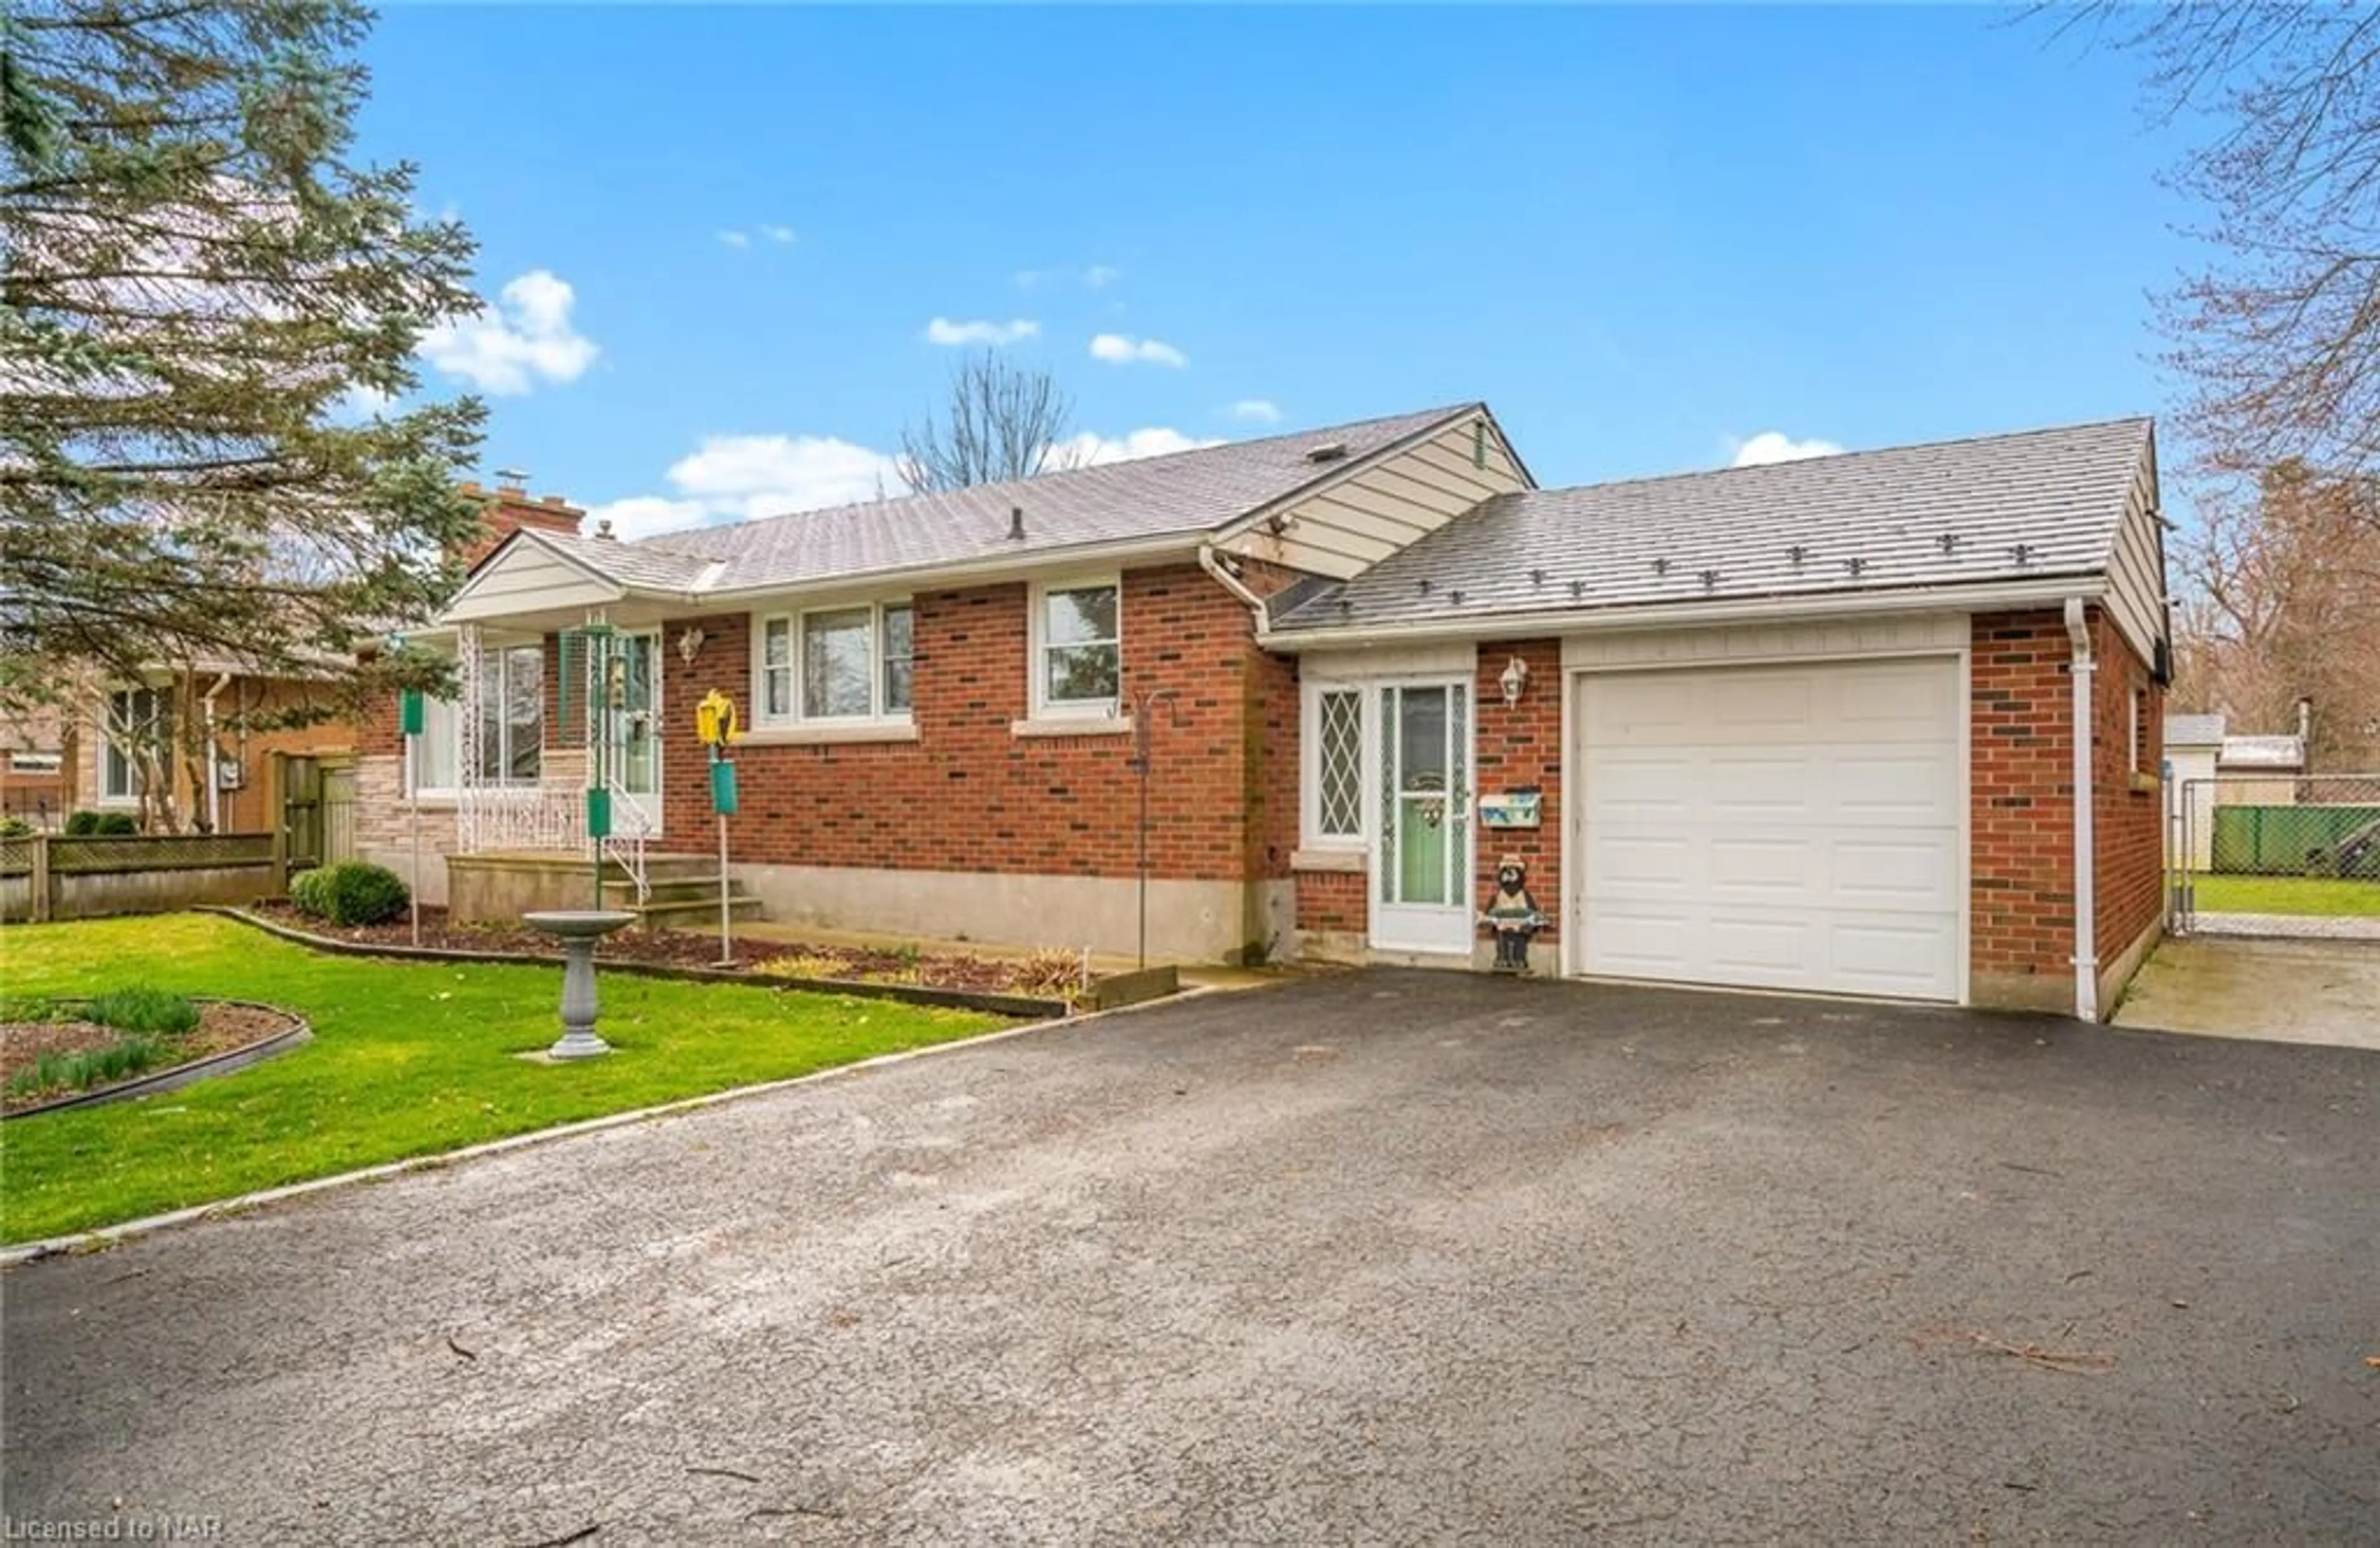 Frontside or backside of a home for 242 Lakeshore Rd, Port Colborne Ontario L3K 2S6